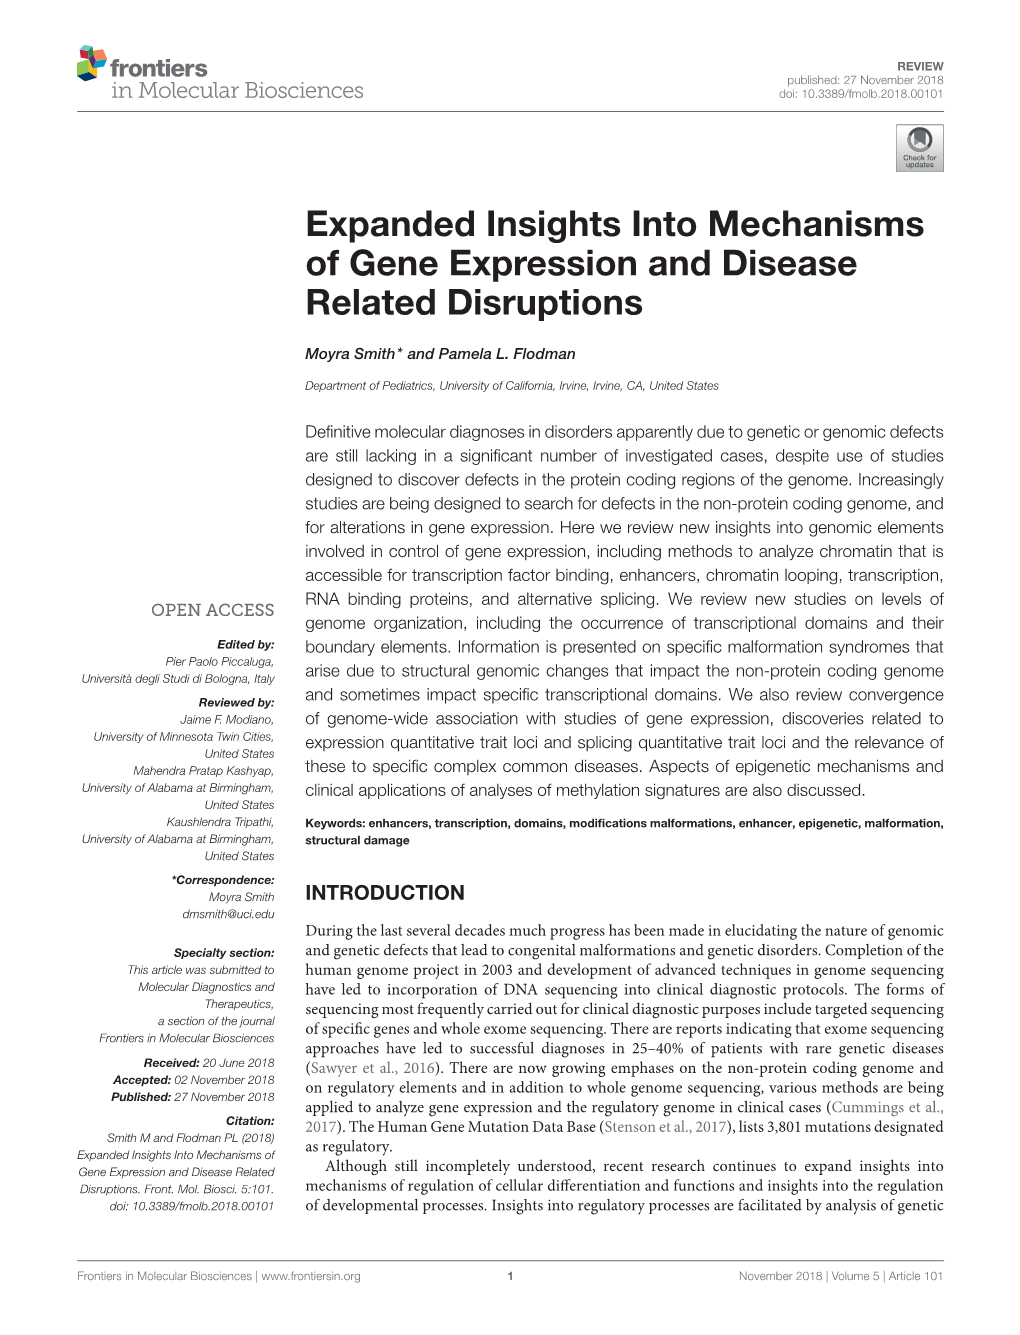 Expanded Insights Into Mechanisms of Gene Expression and Disease Related Disruptions